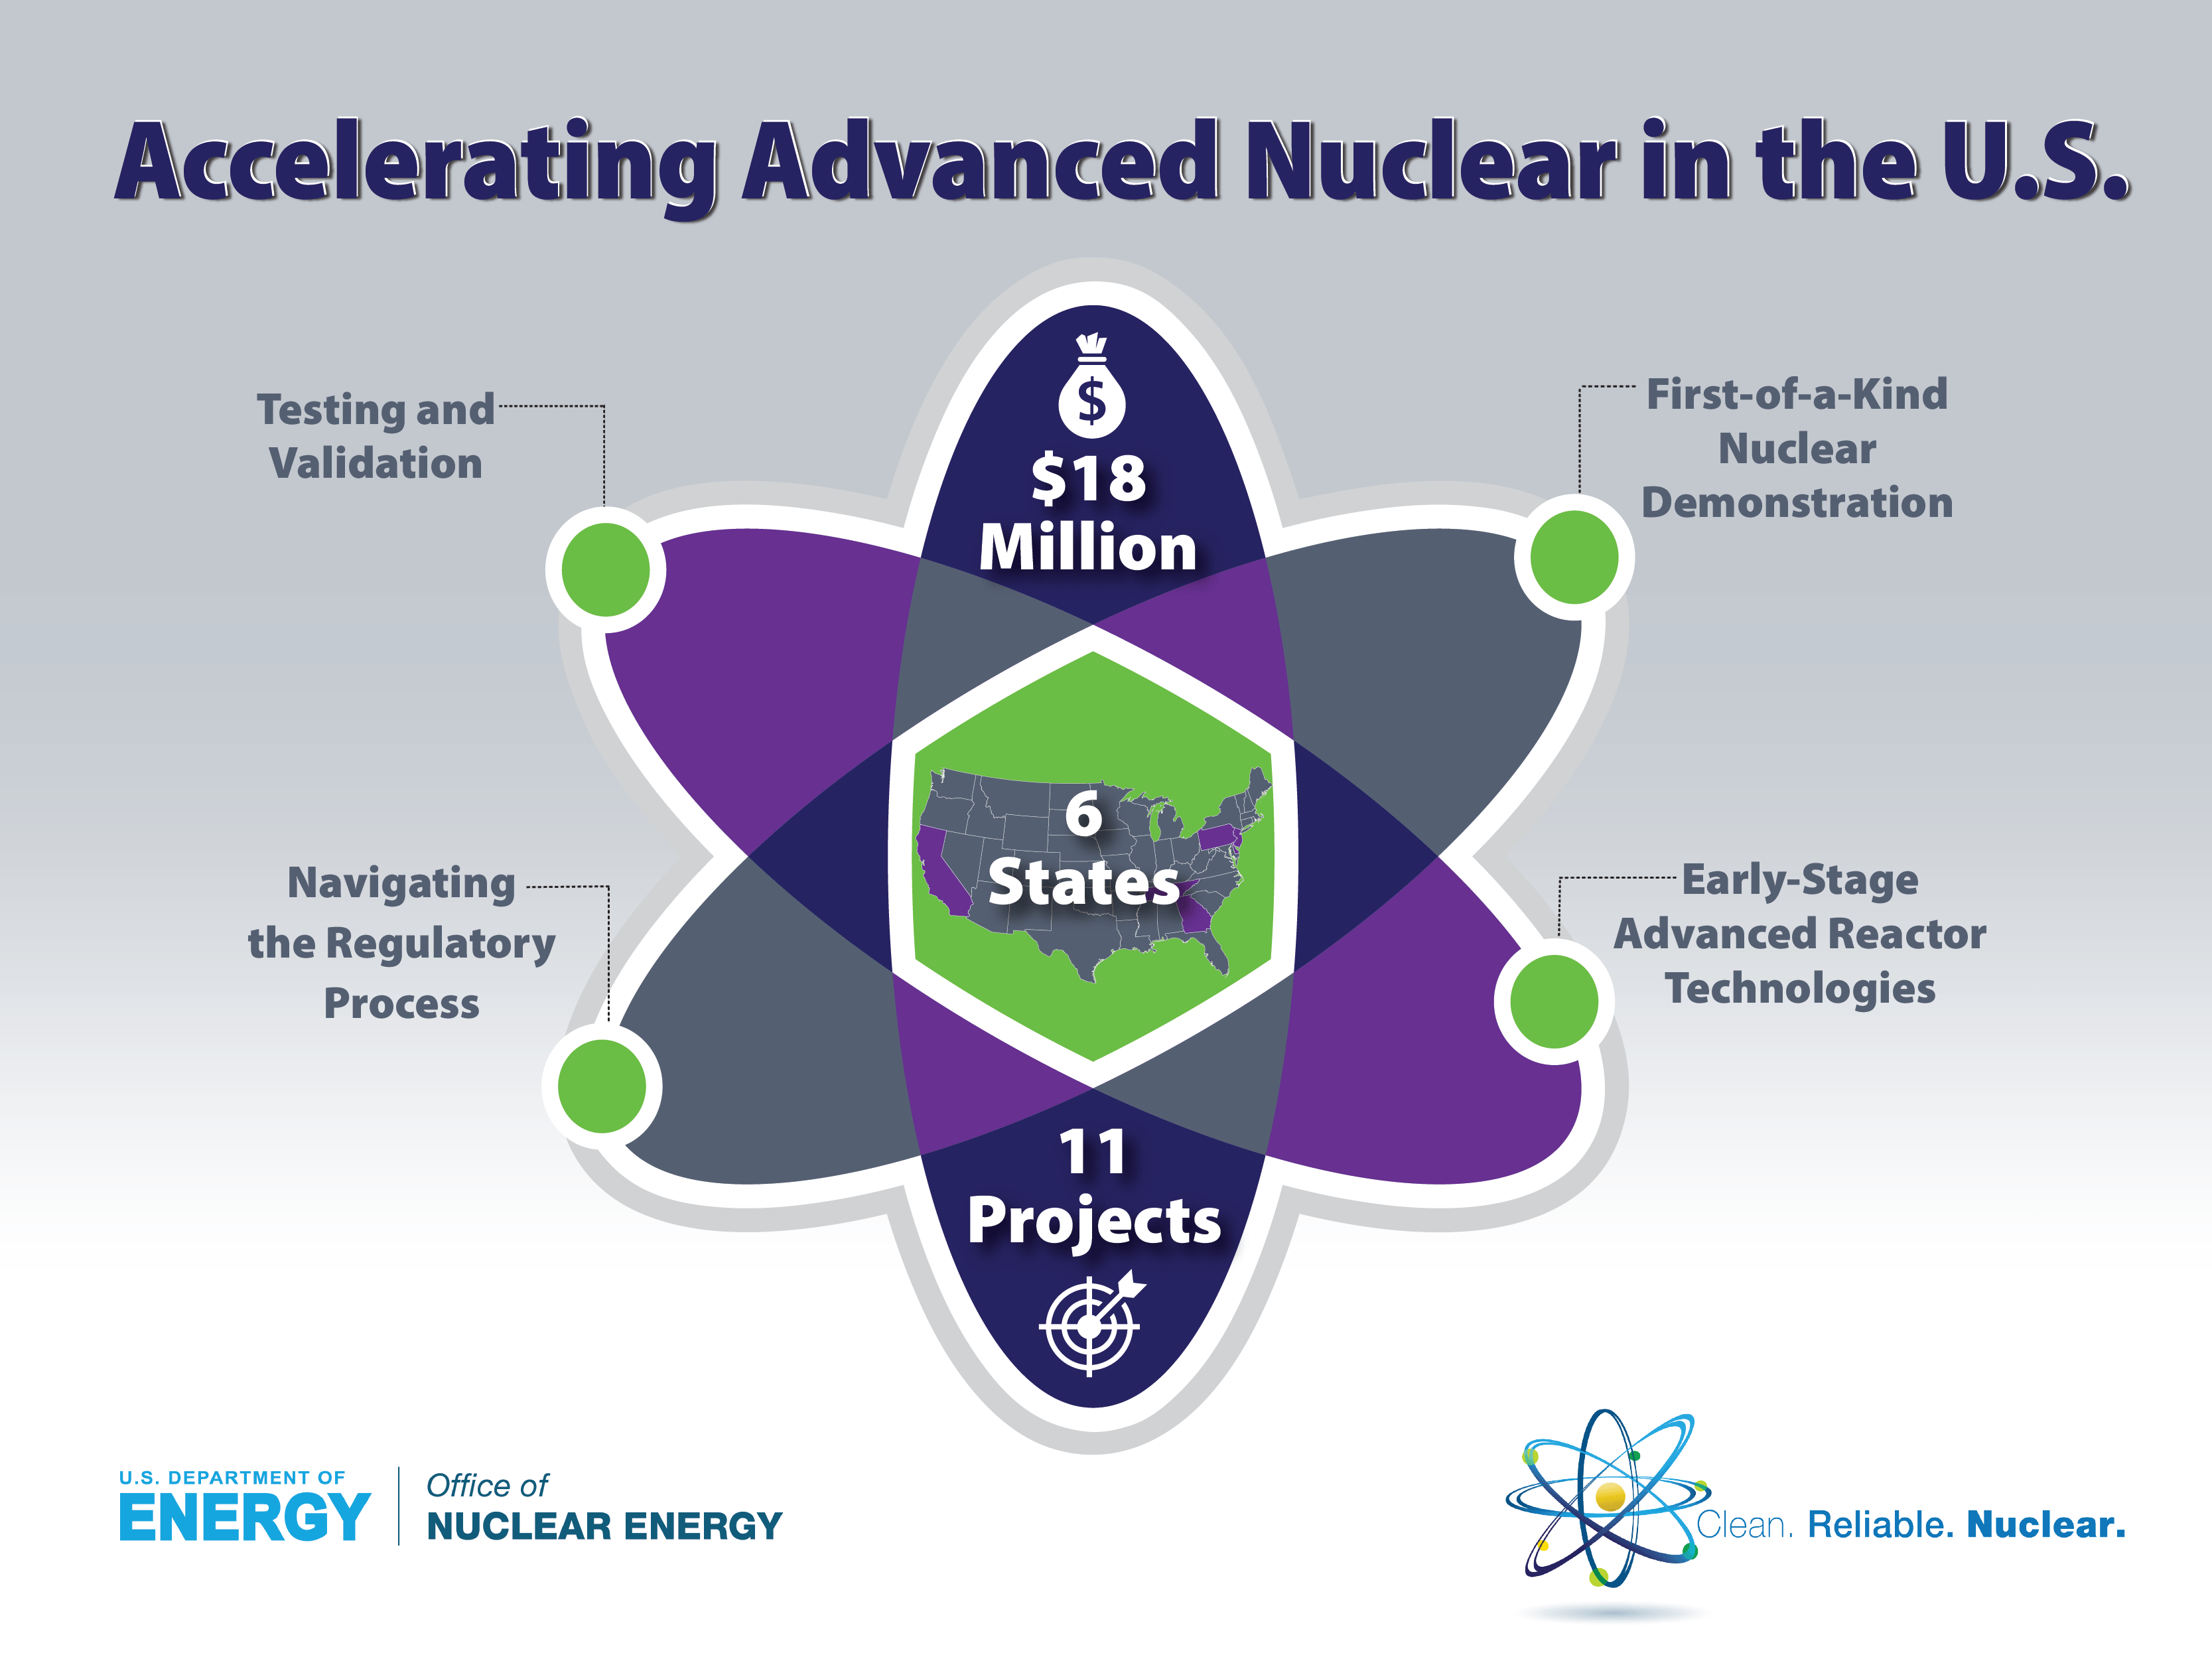 USNRC Logo - U.S. Advanced Nuclear Technology Projects to Receive $18 Million